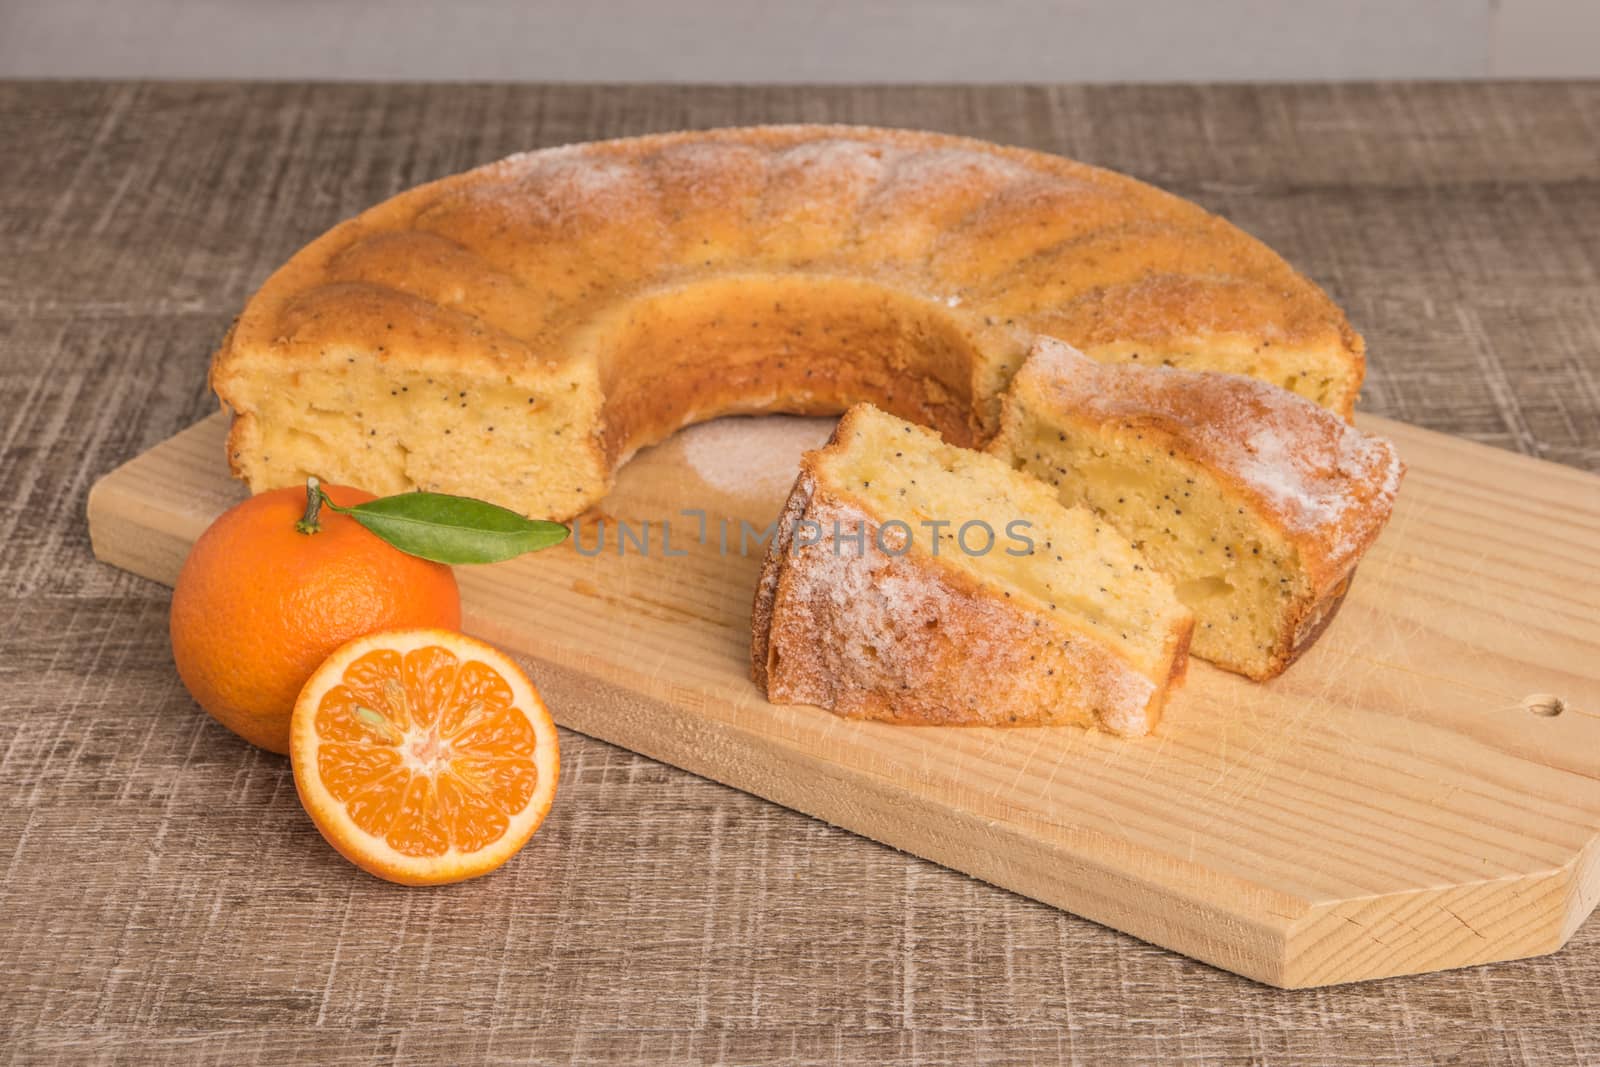 Slices of clementine cake with powdered sugar topping. Cake on a board with fresh clementines on wooden board.